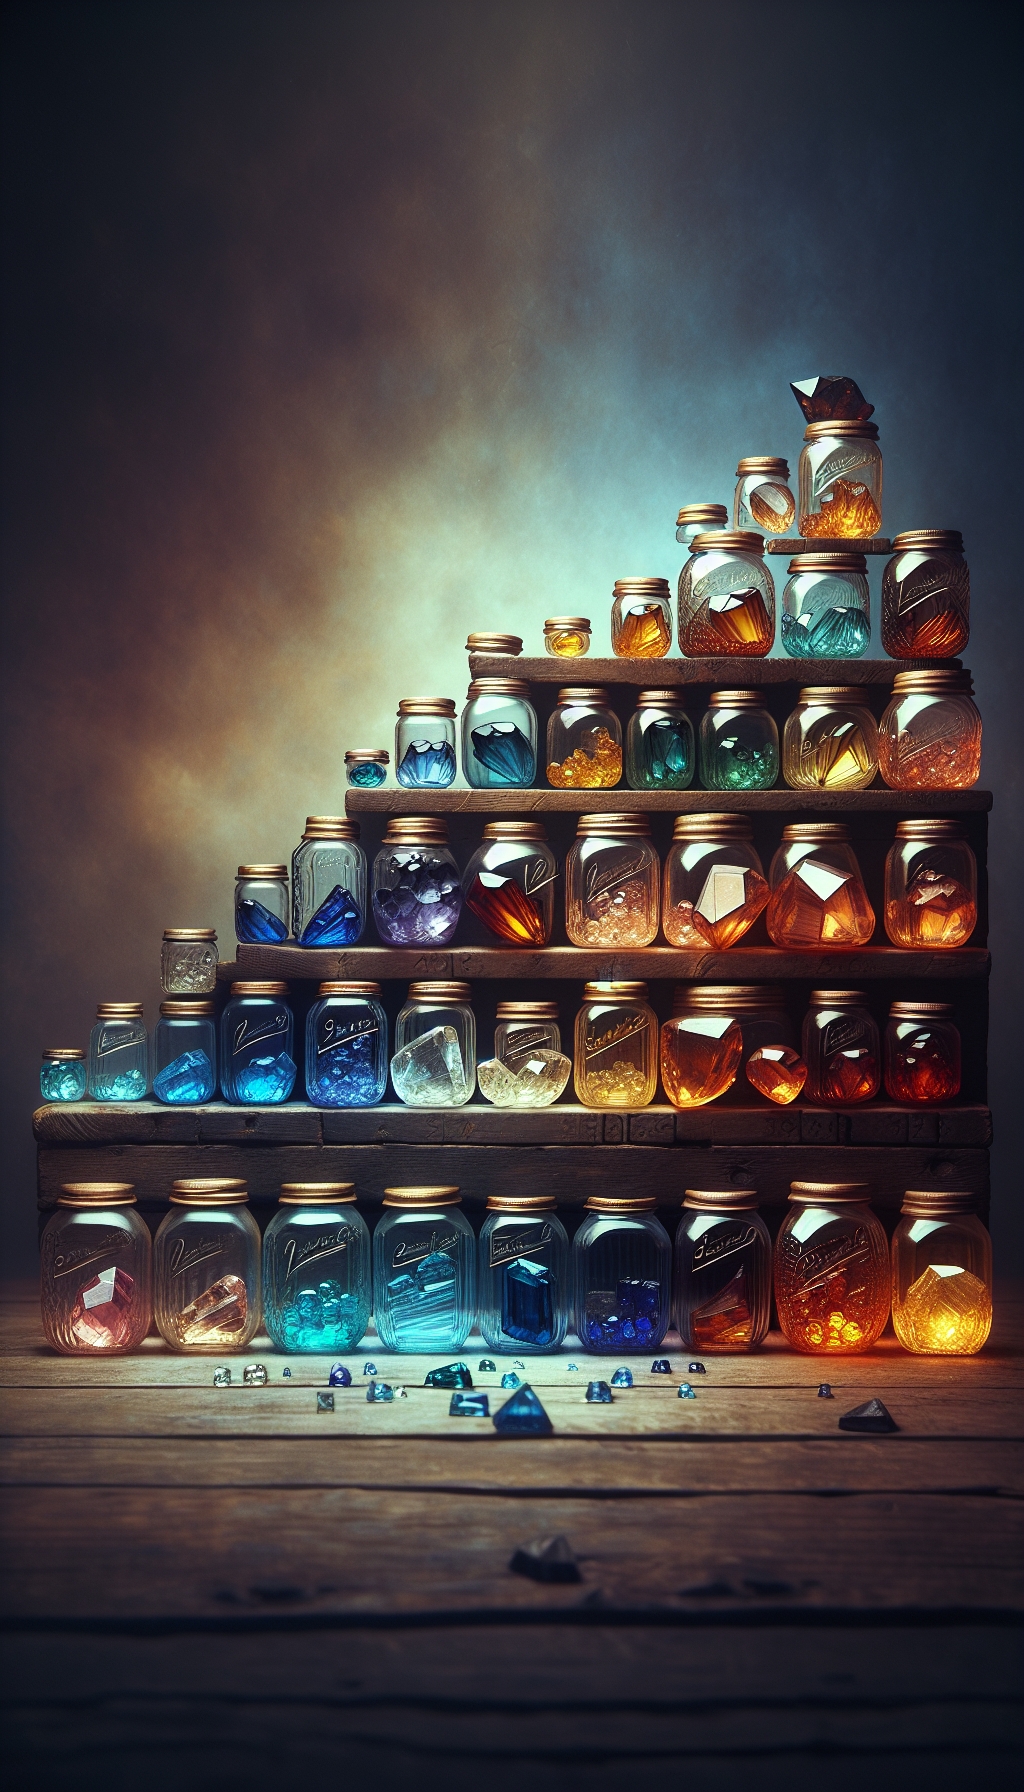 An ethereal array of antique mason jars, ascending like steps, showcases a gradient of rare hues - from amber to cobalt blue - each jar cradling a gem that matches its color. The jars also feature price tags, symbolizing their escalating values, with the clearest and most uniquely tinted gems casting a soft, luminous glow, emphasizing their rarity and worth.